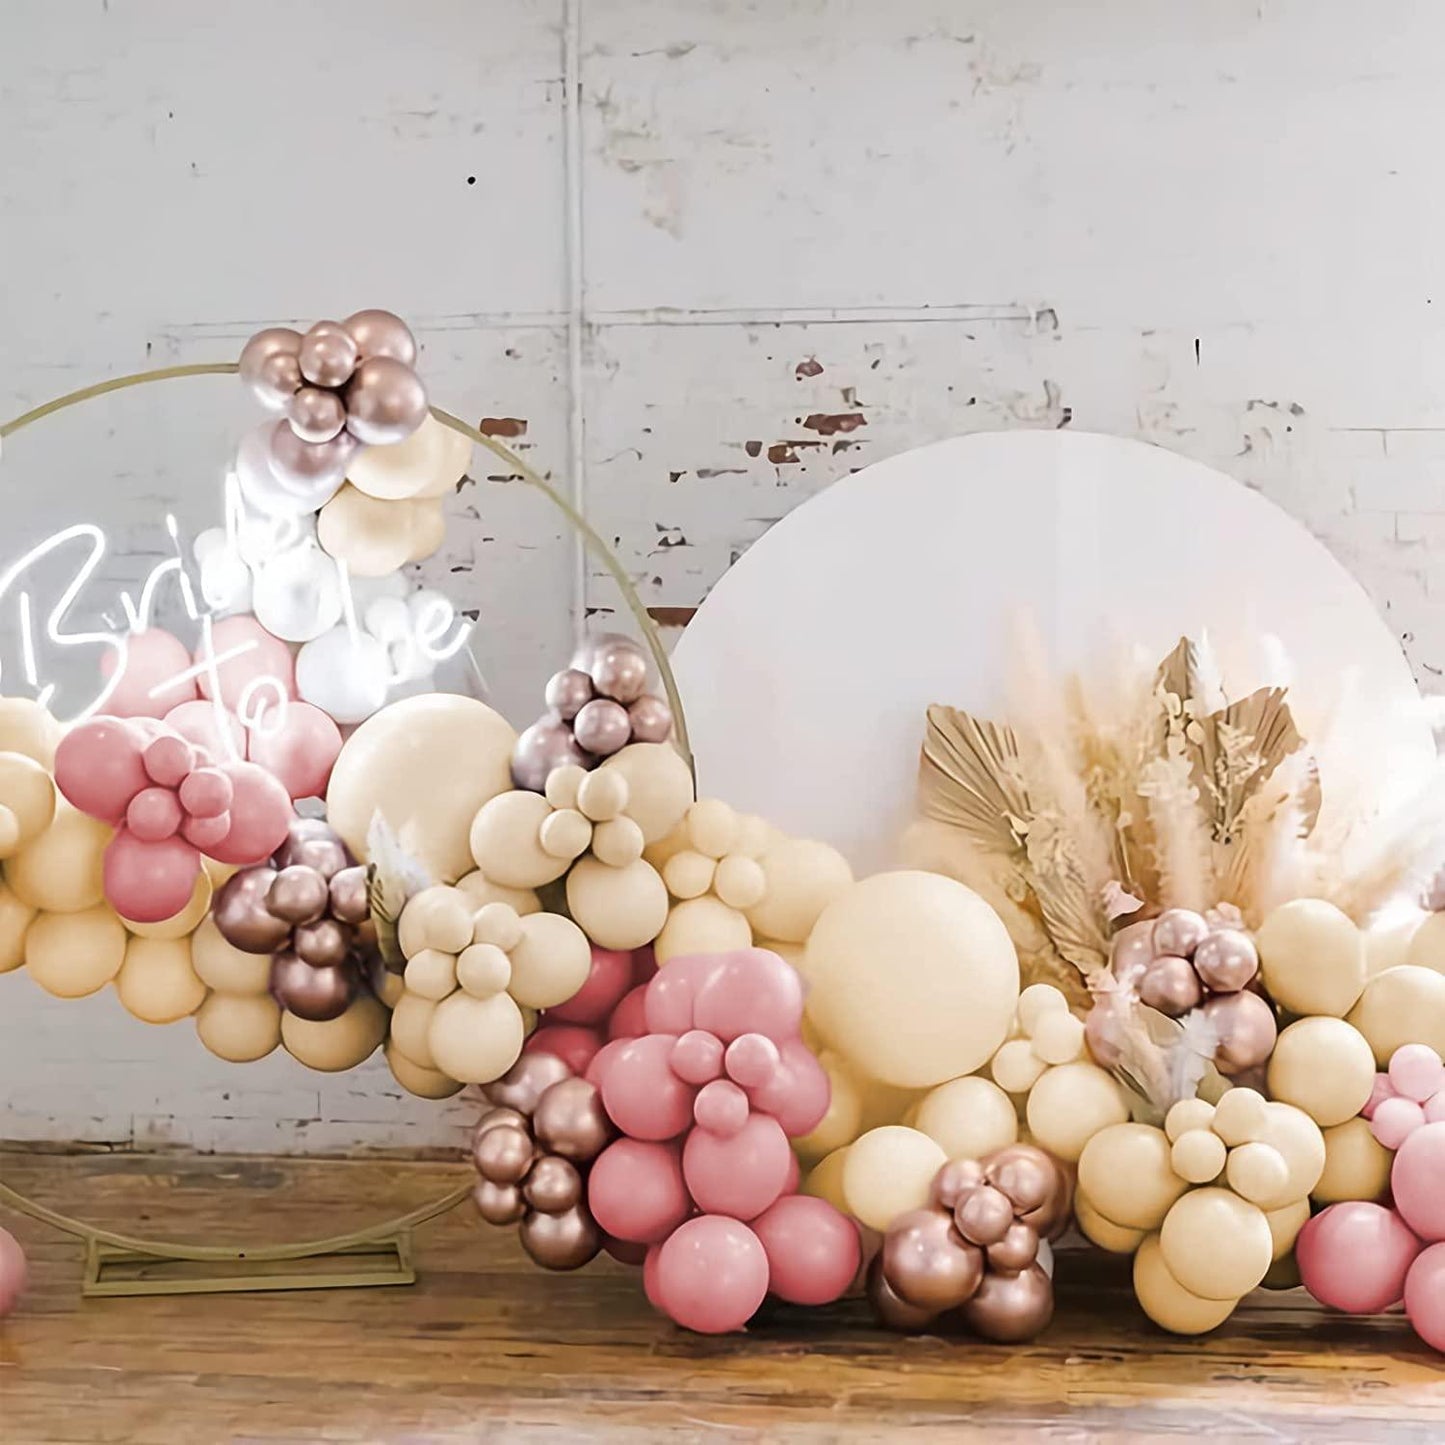 142pcs Boho Balloon Garland Arch Kit With Pink Chocolate Coloured Ivory White Metallic Rose Gold Balloons for Baby Shower, Birthday, Bridal Shower - If you say i do